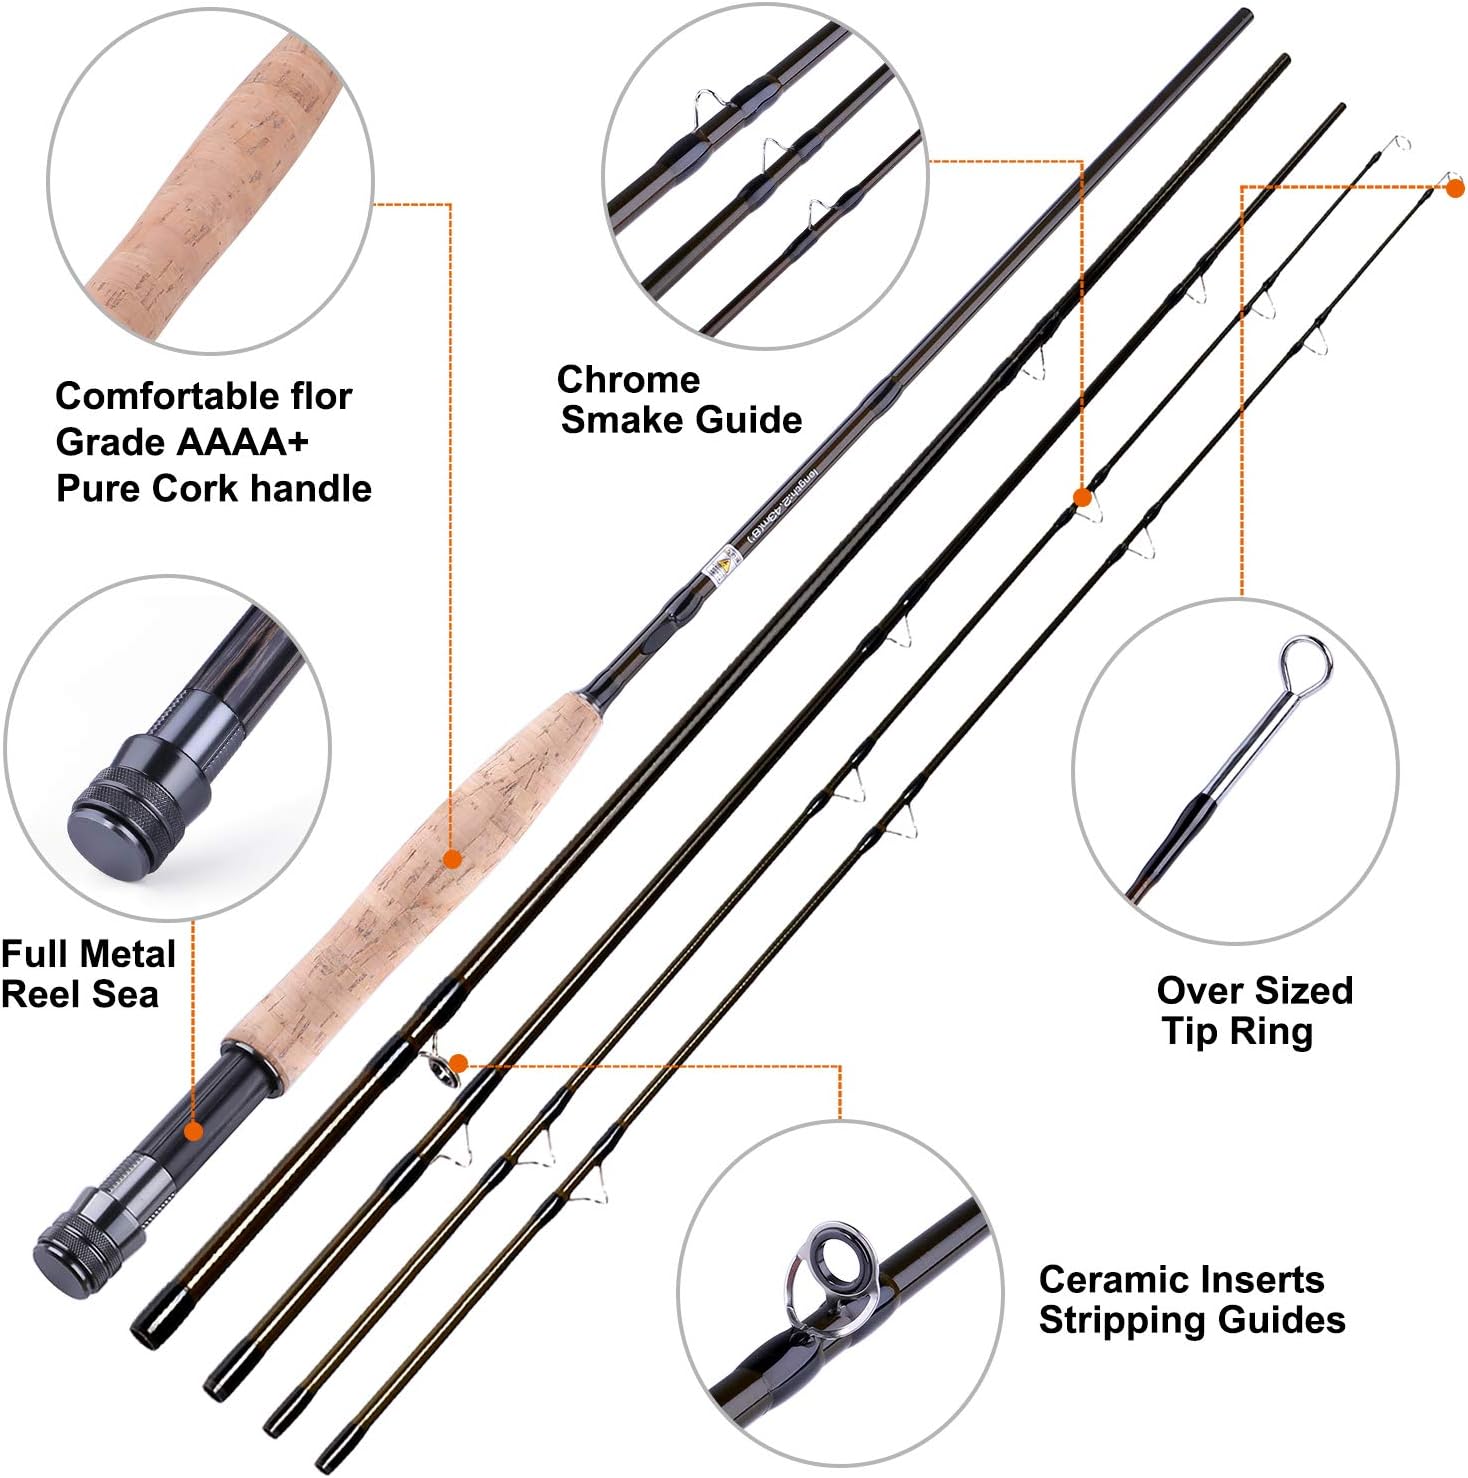 TOPFORT Fly Fishing Rod Review